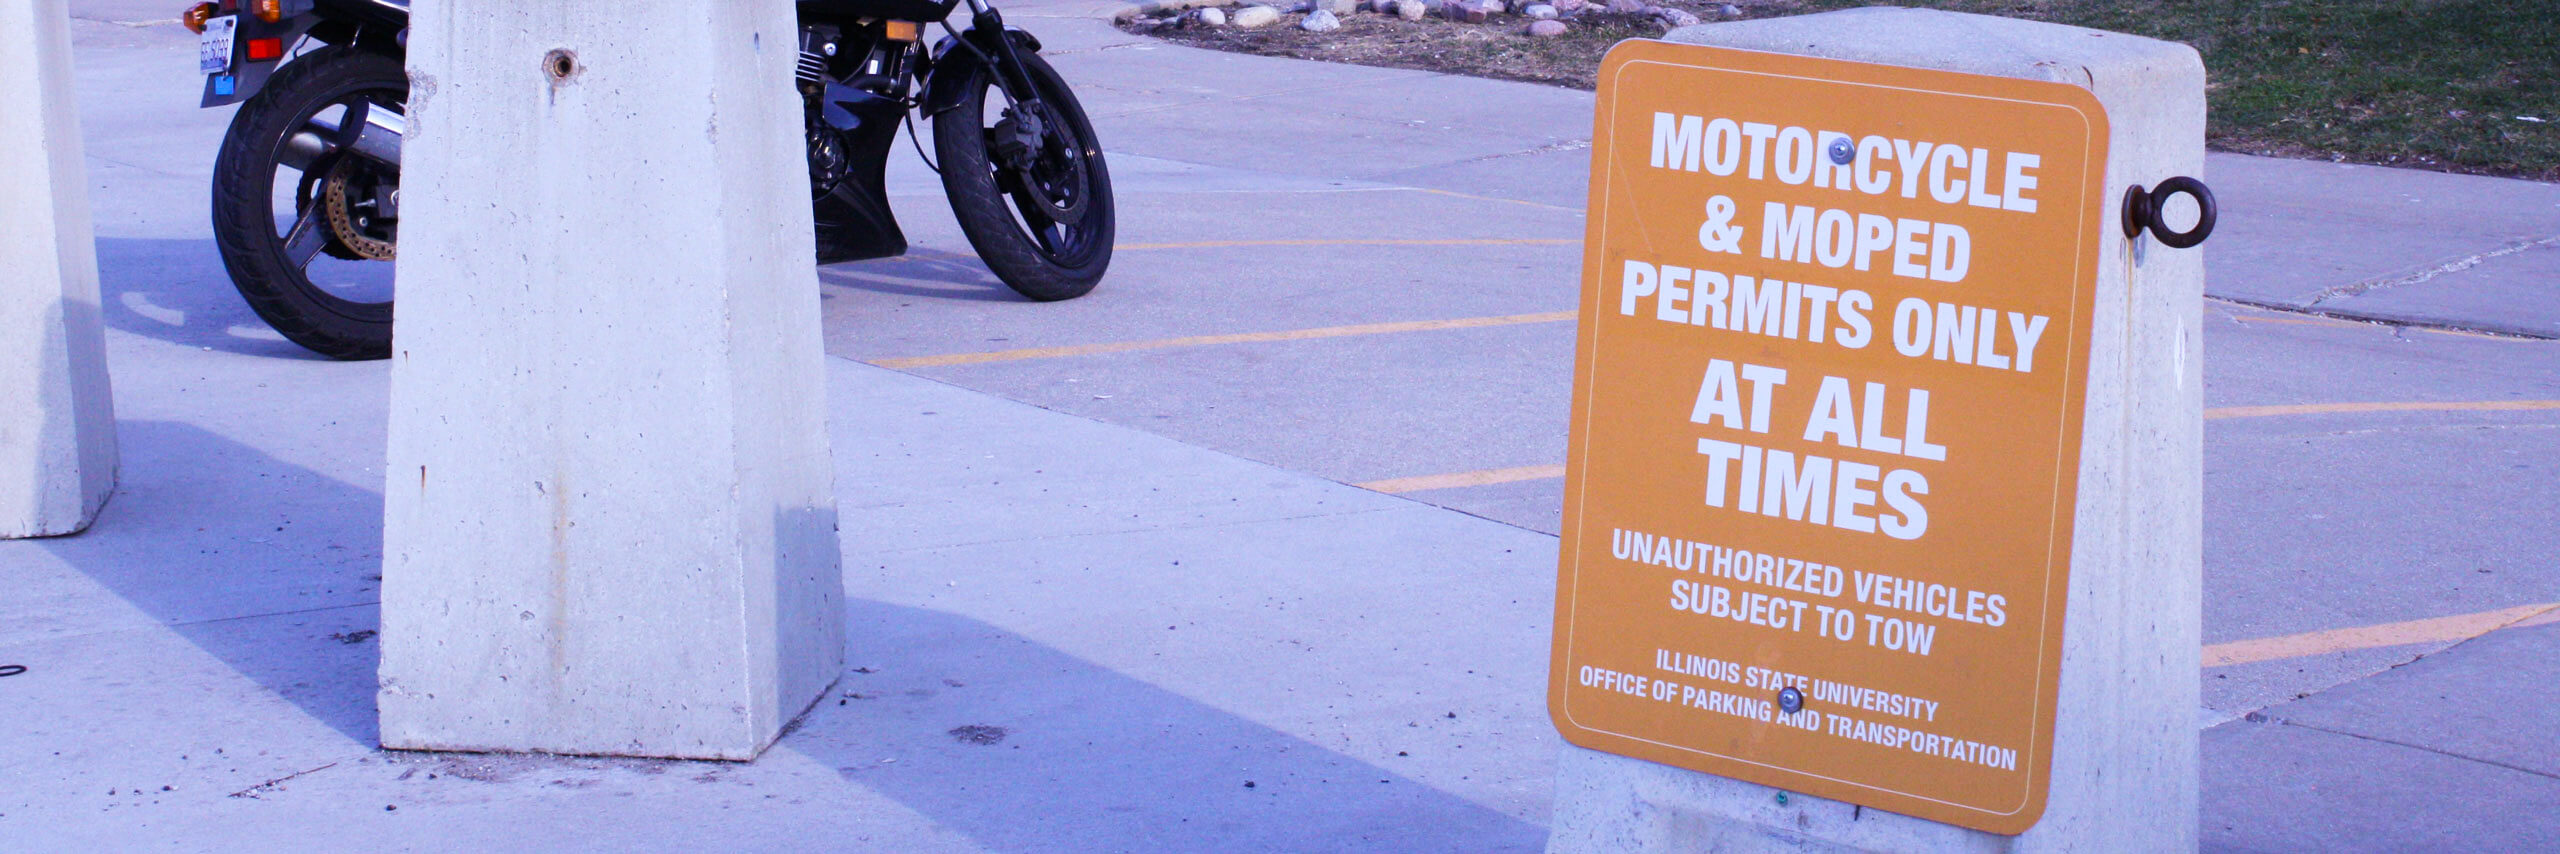 Photo of Motorcycle/Moped parking sign.